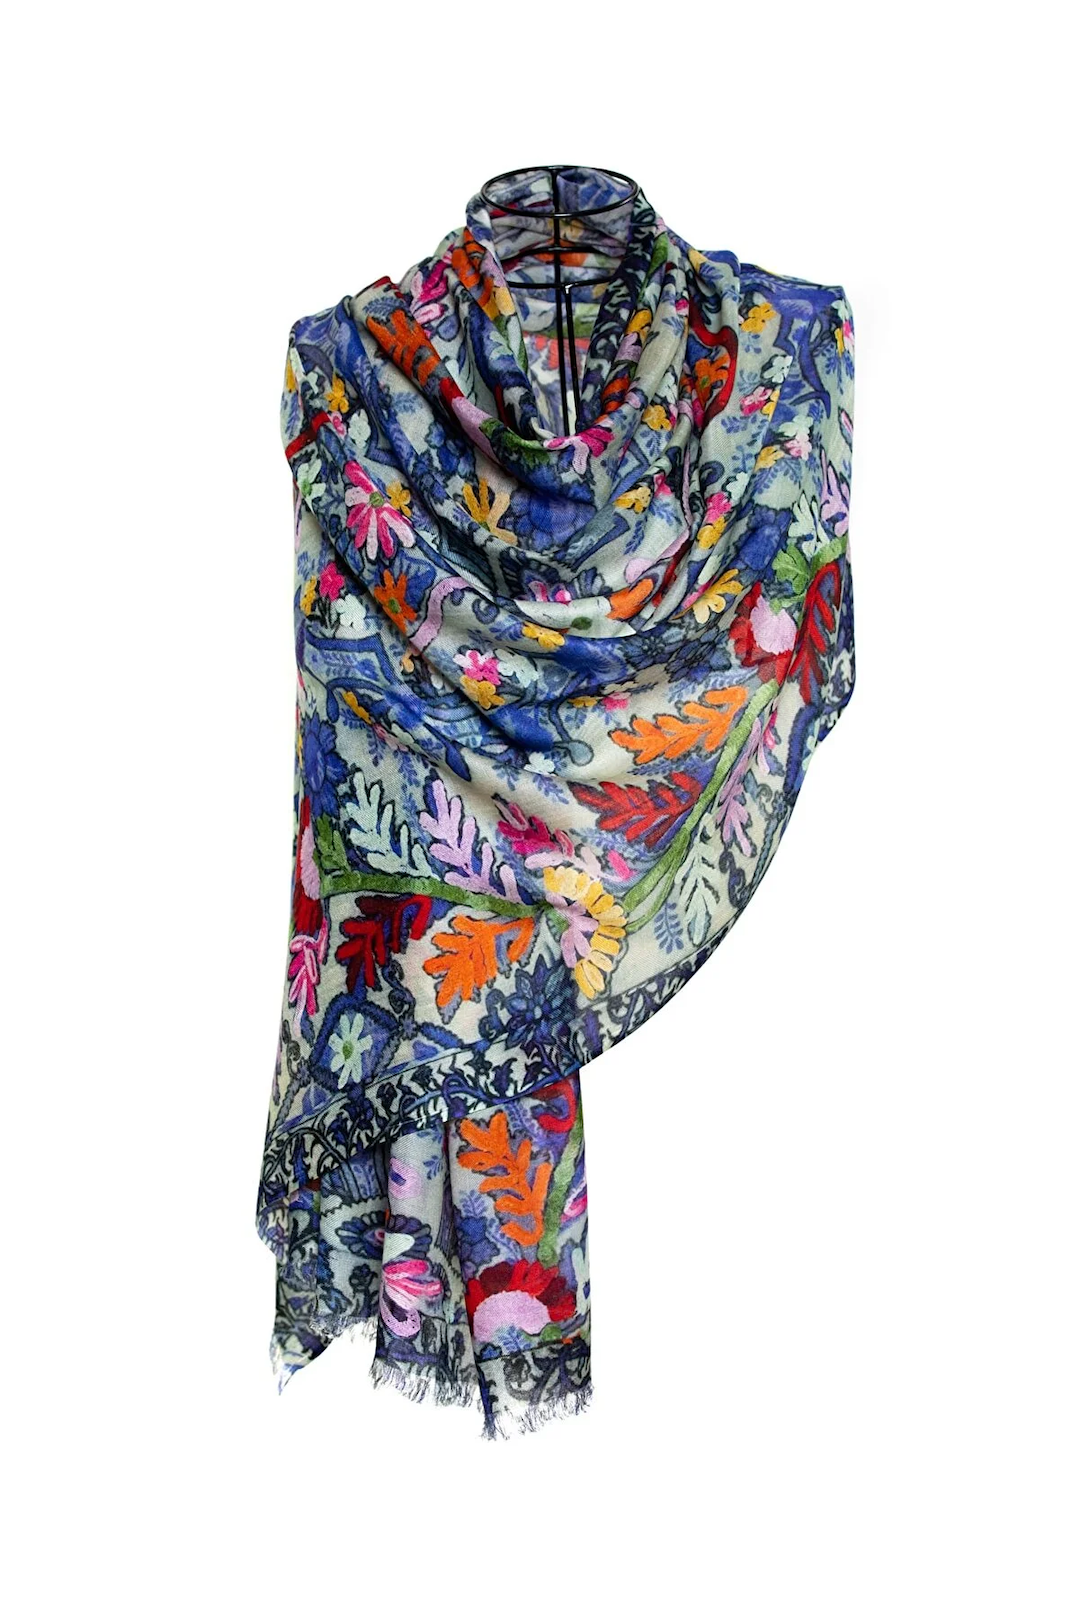 Micro Modal Cashmere Printed Embroidery Shawl Mo-Shmere - Blue Carnation